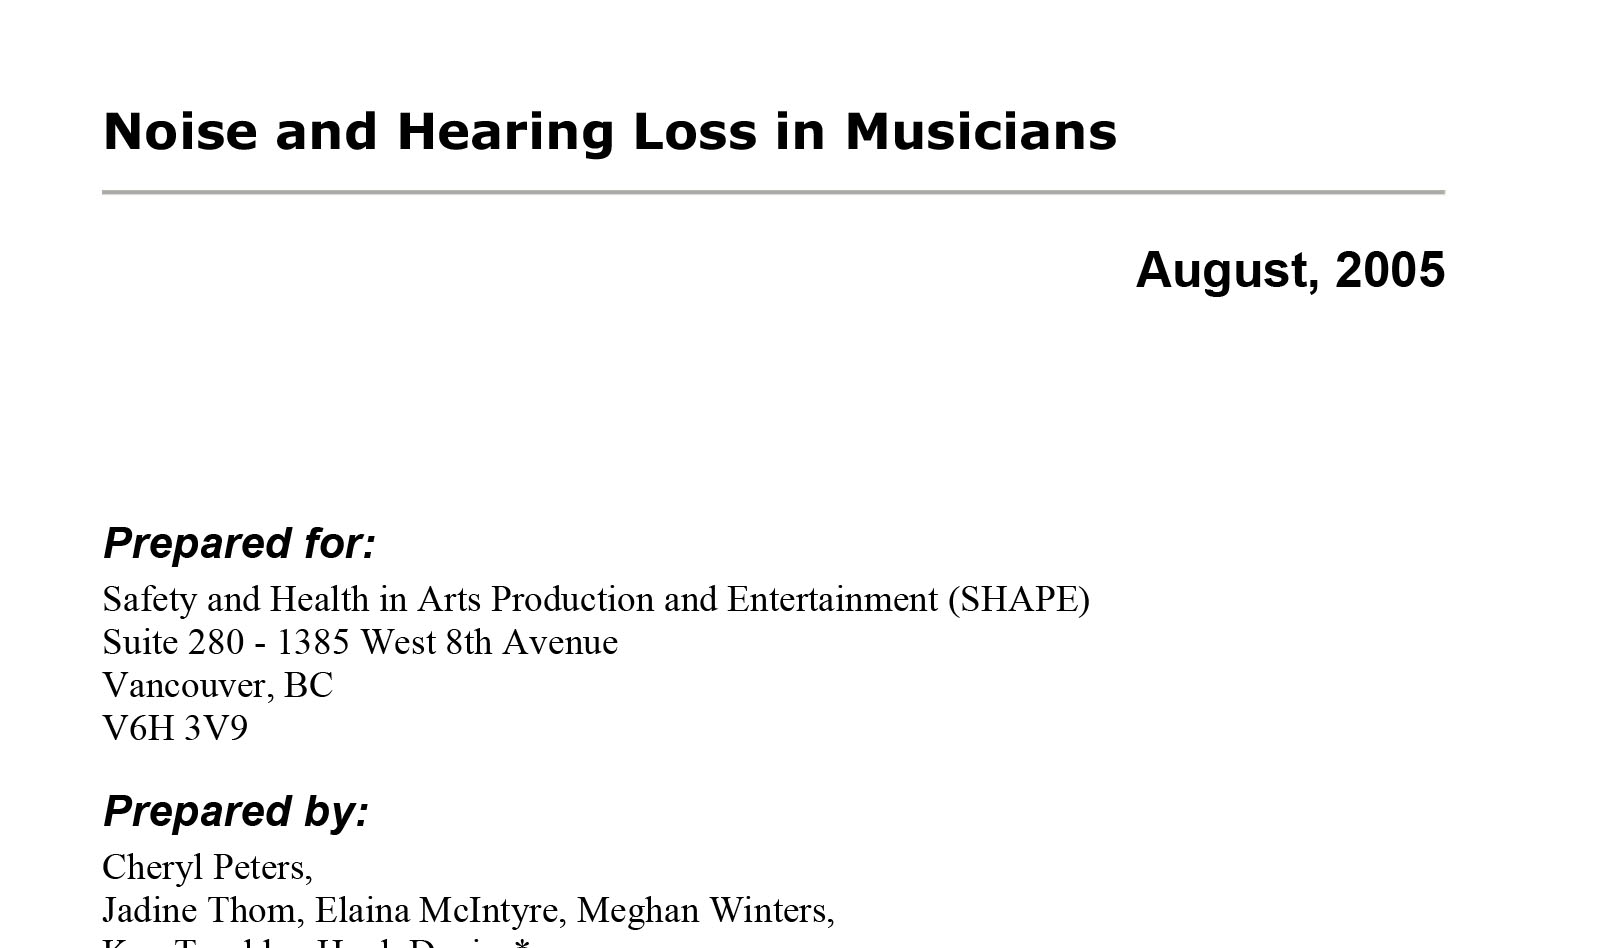 Noise and Hearing Loss in Musicians